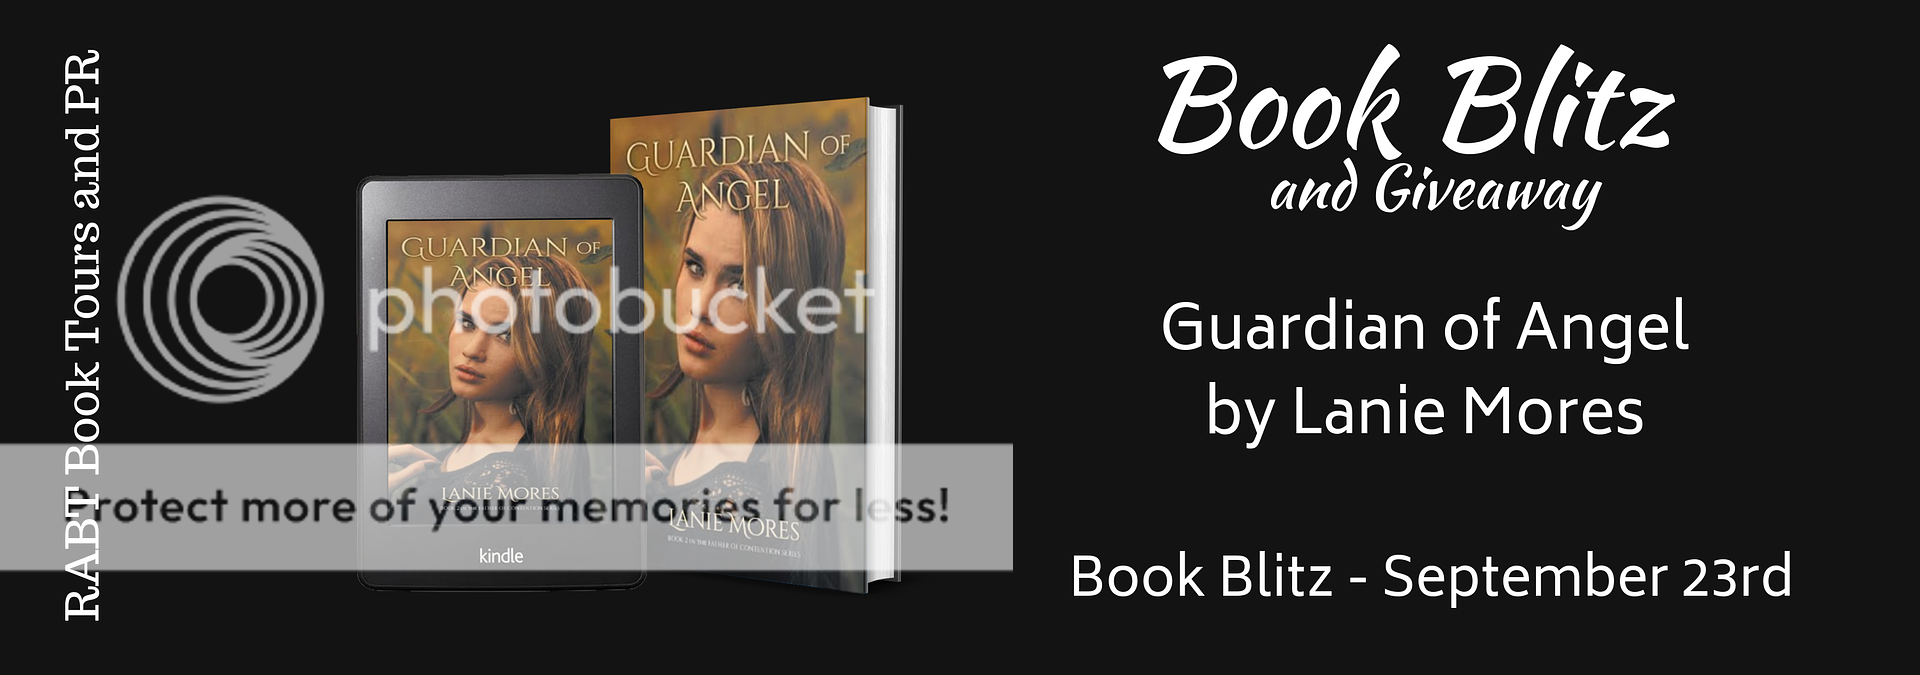 Book Blitz: Guardian of Angel by Lanie Mores #scifi #fantasy #paranormal #giveaway #excerpt @RABTBookTours @laniemores